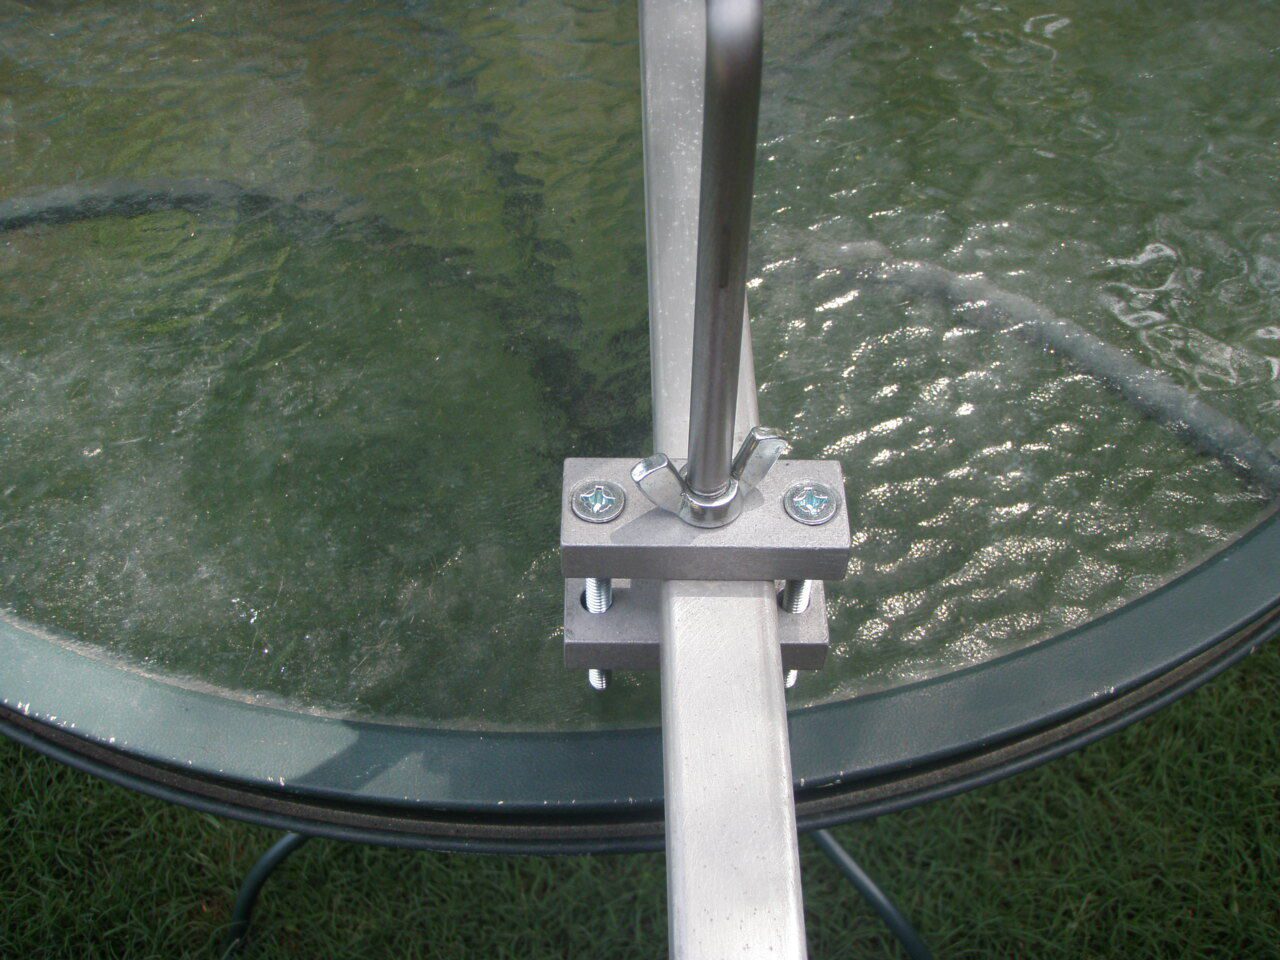 A glass table with a metal frame and some water